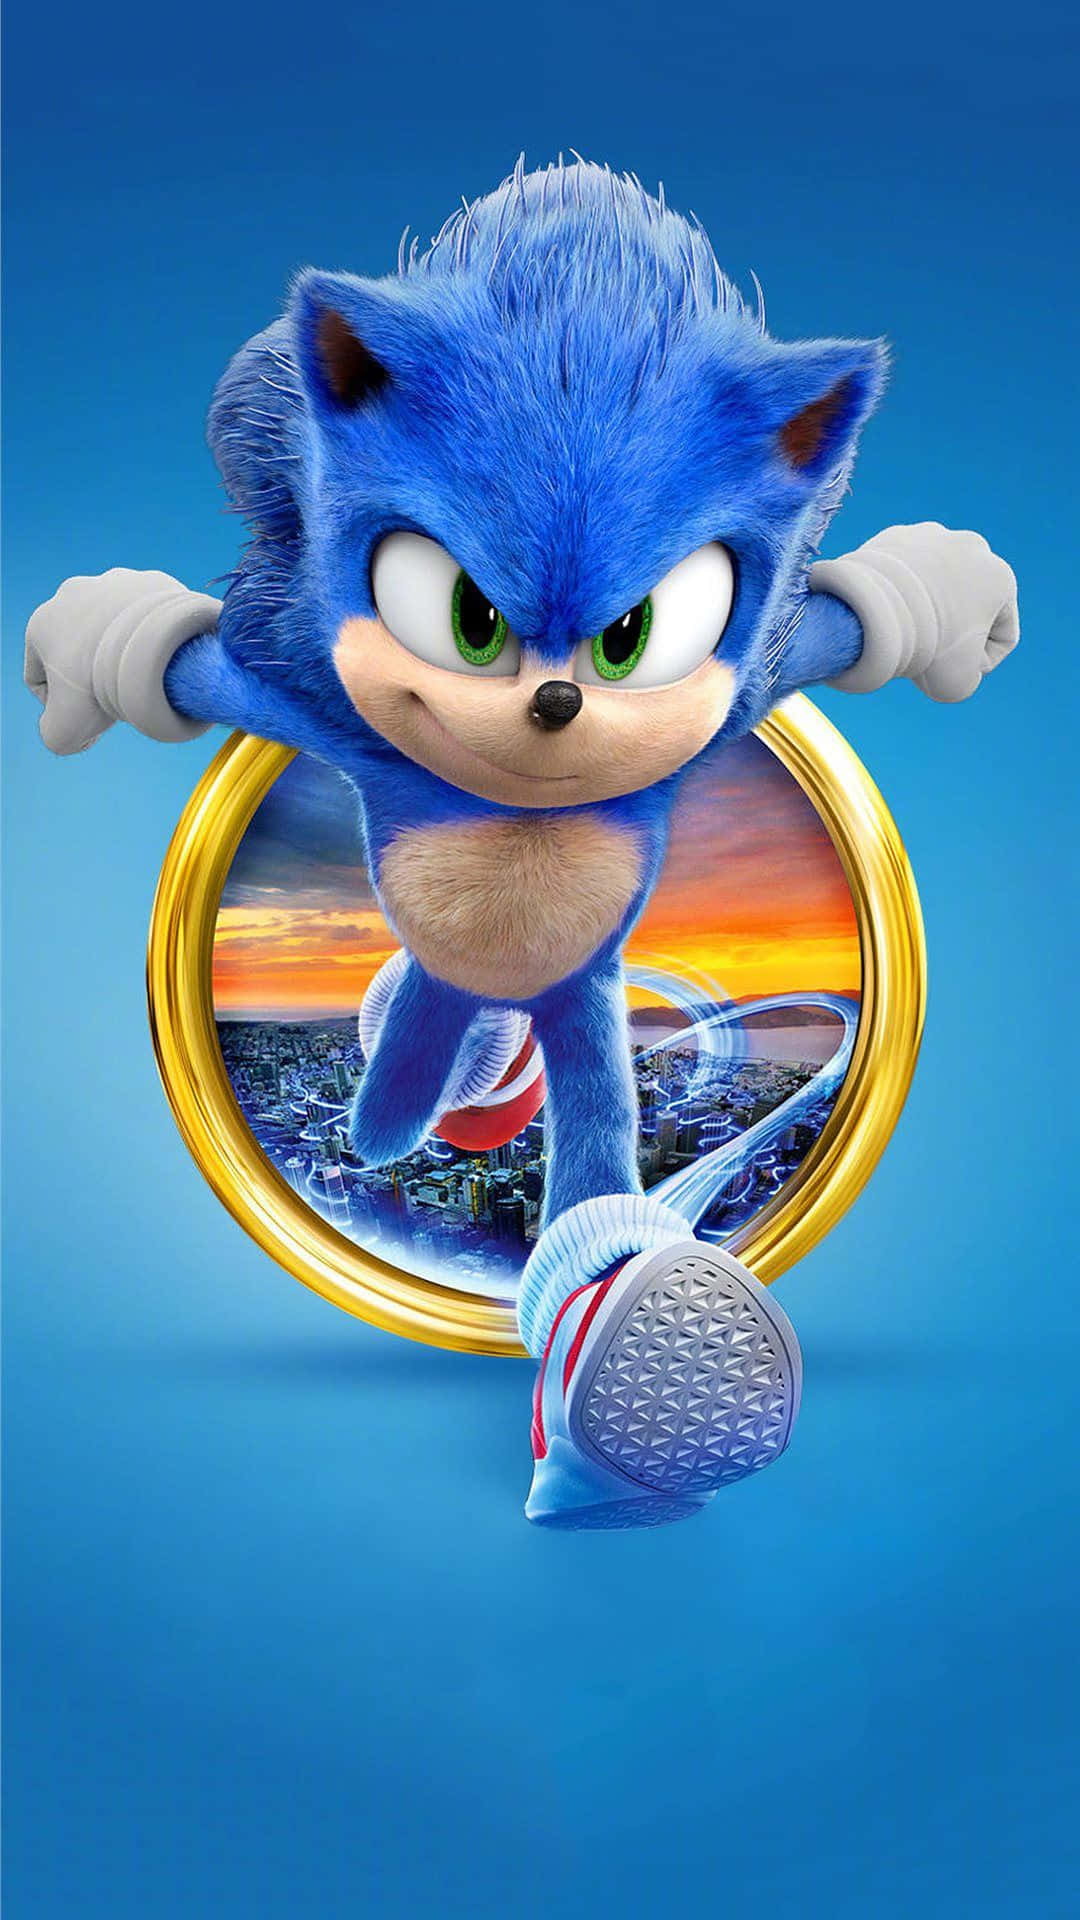 Sonic the Hedgehog running fast on the green grass